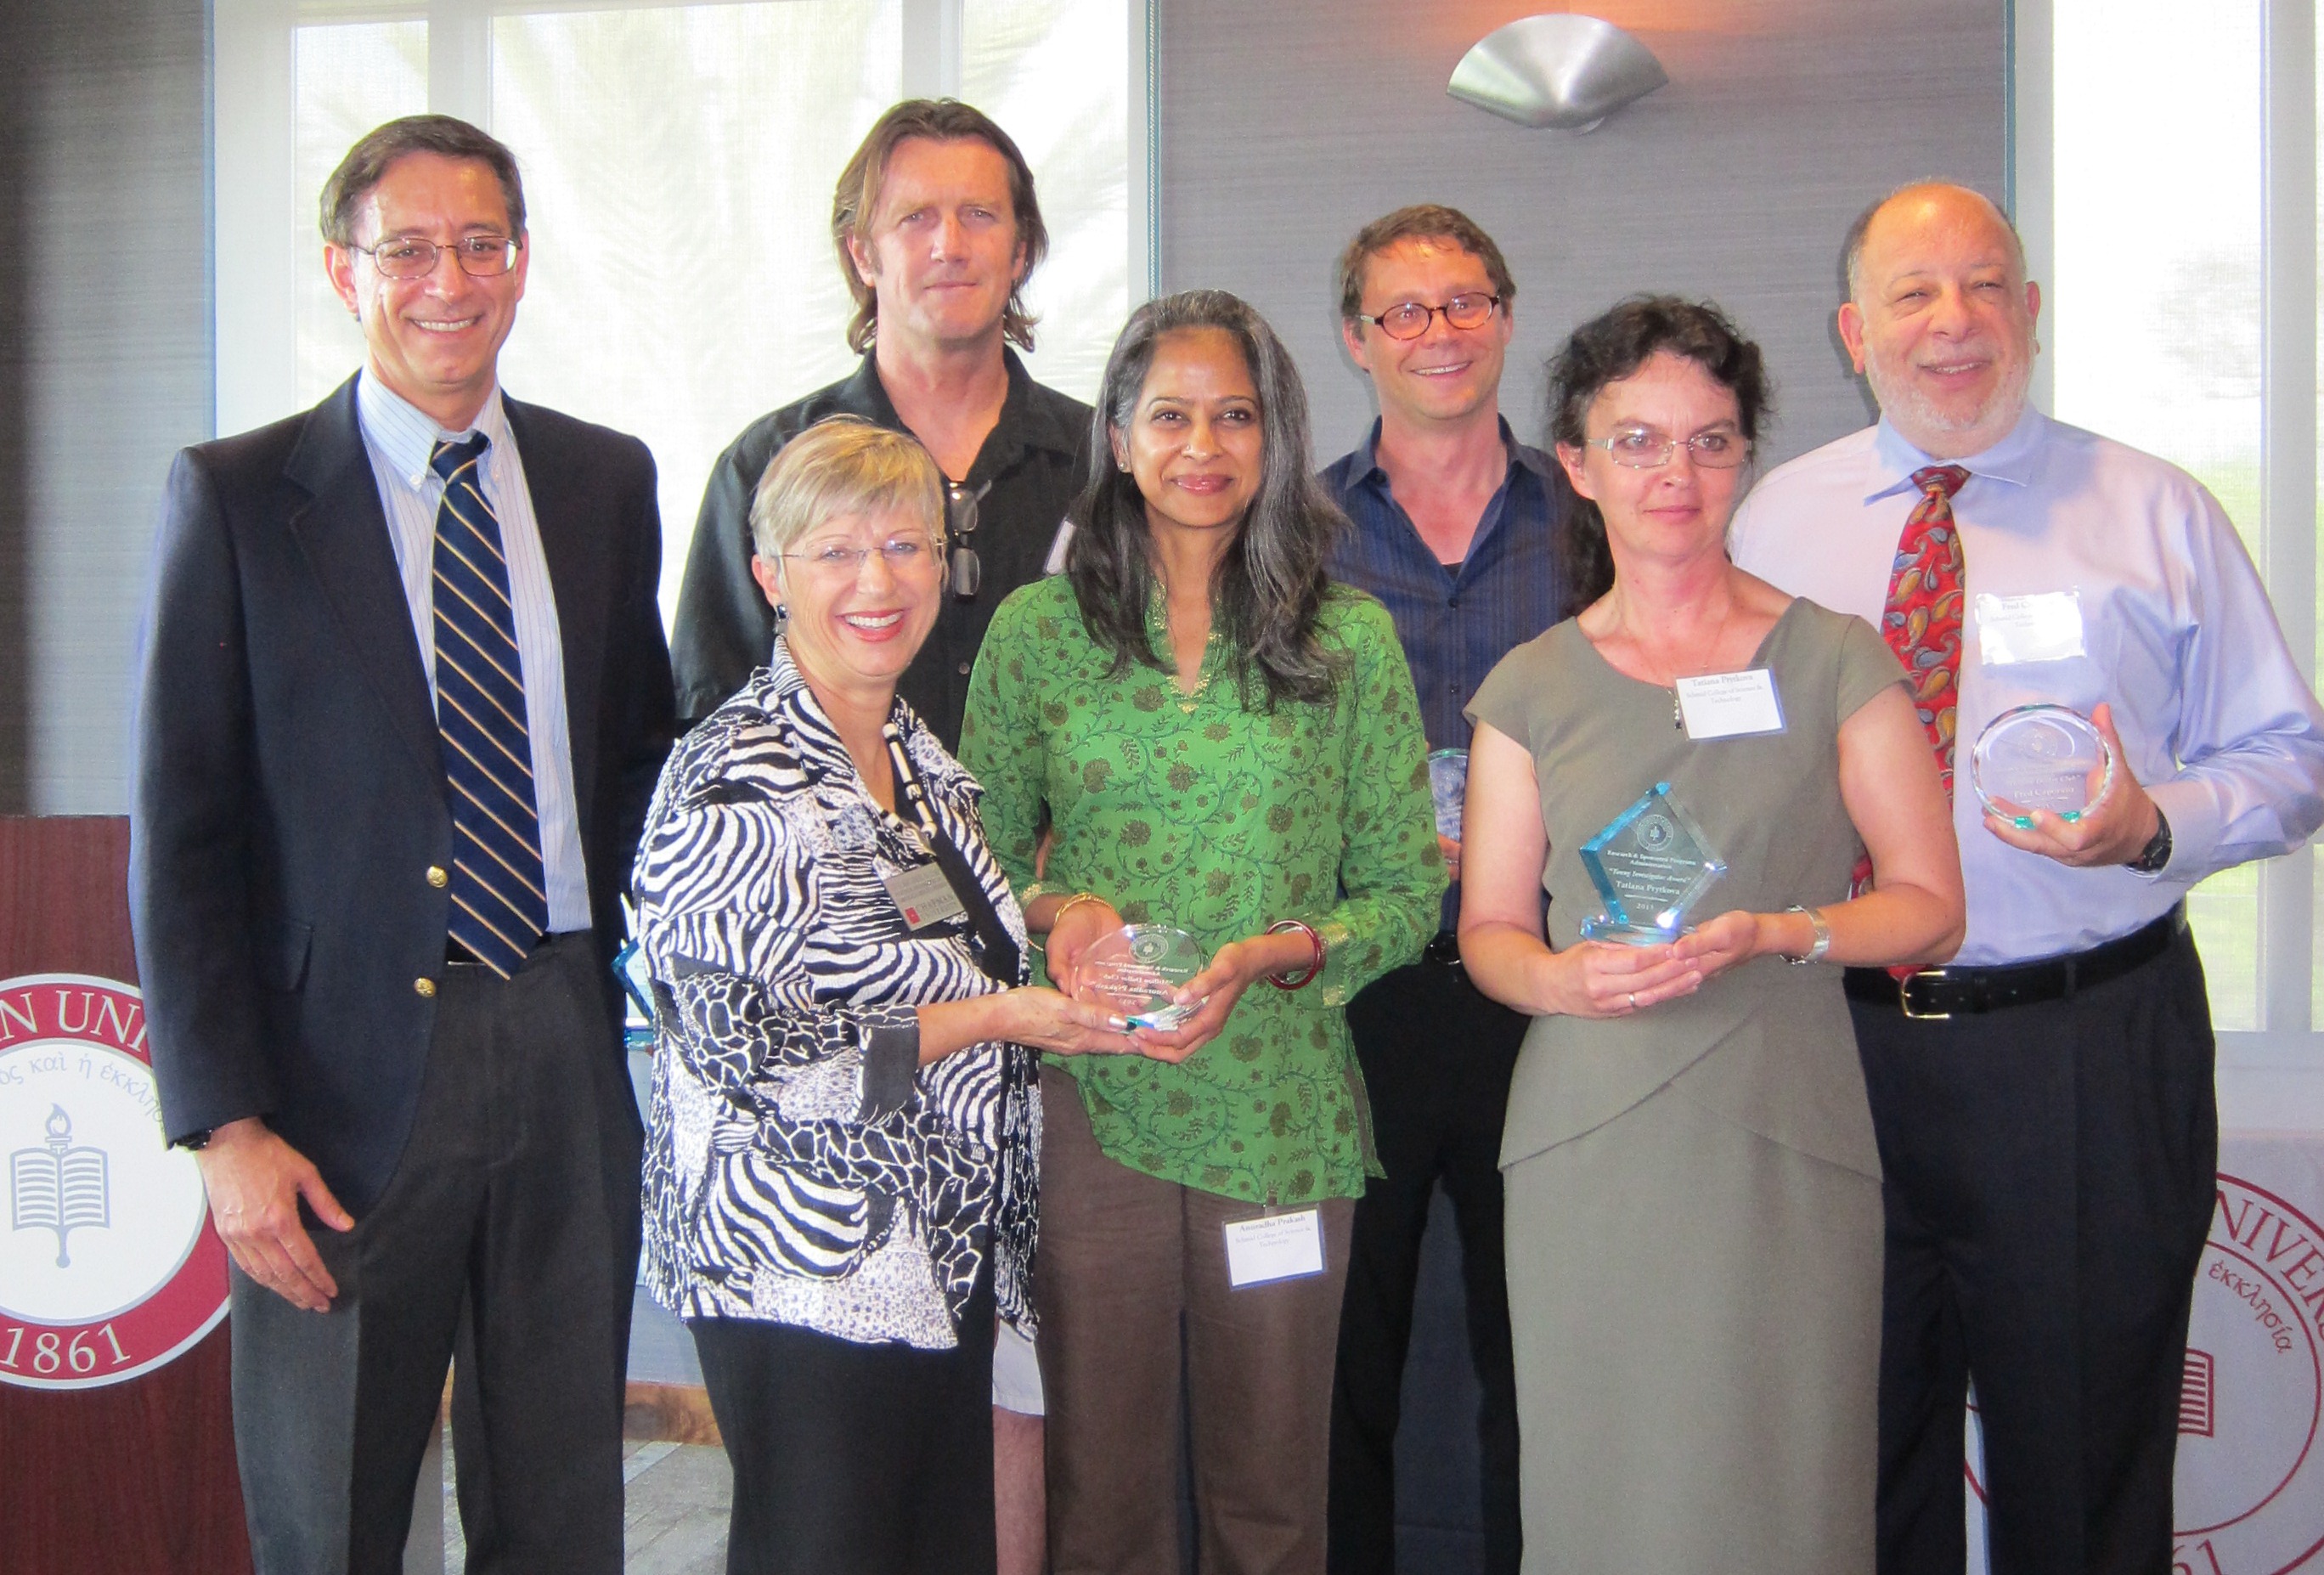 Recipients of awards presented at the Faculty Research Recognition Reception included, back row, from left, Laurence Iannaccone, Warren de Bruyn, Bart Wilson and Fred Caporaso; front row, from left, Judith Montgomery, Anuradha Prakash and Tatiana Prytkova.